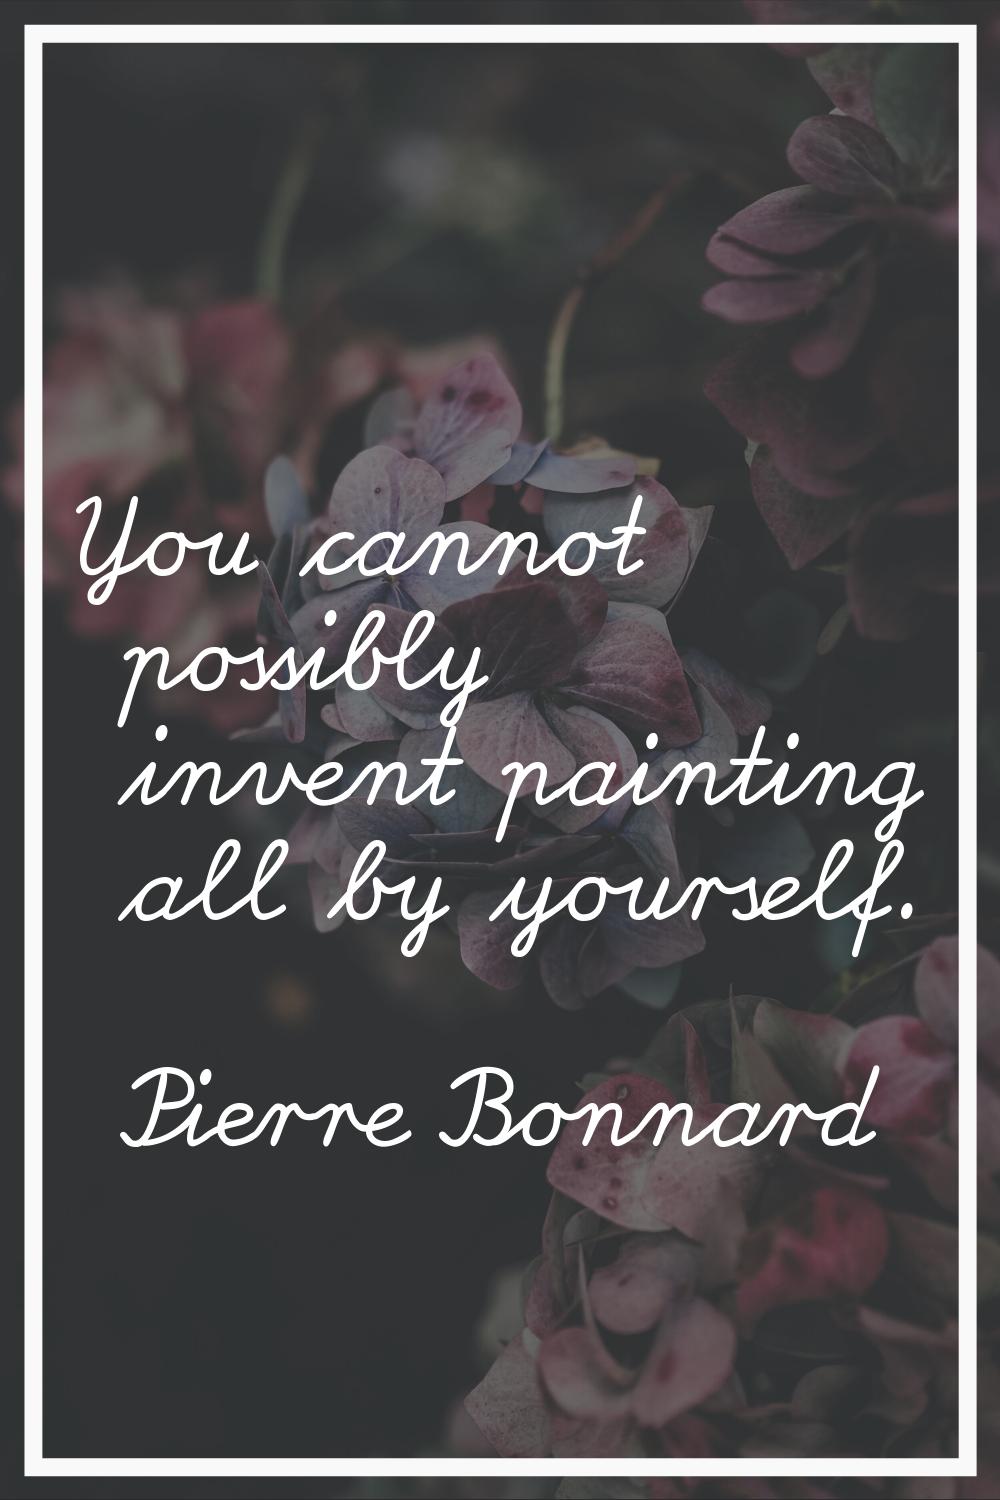 You cannot possibly invent painting all by yourself.